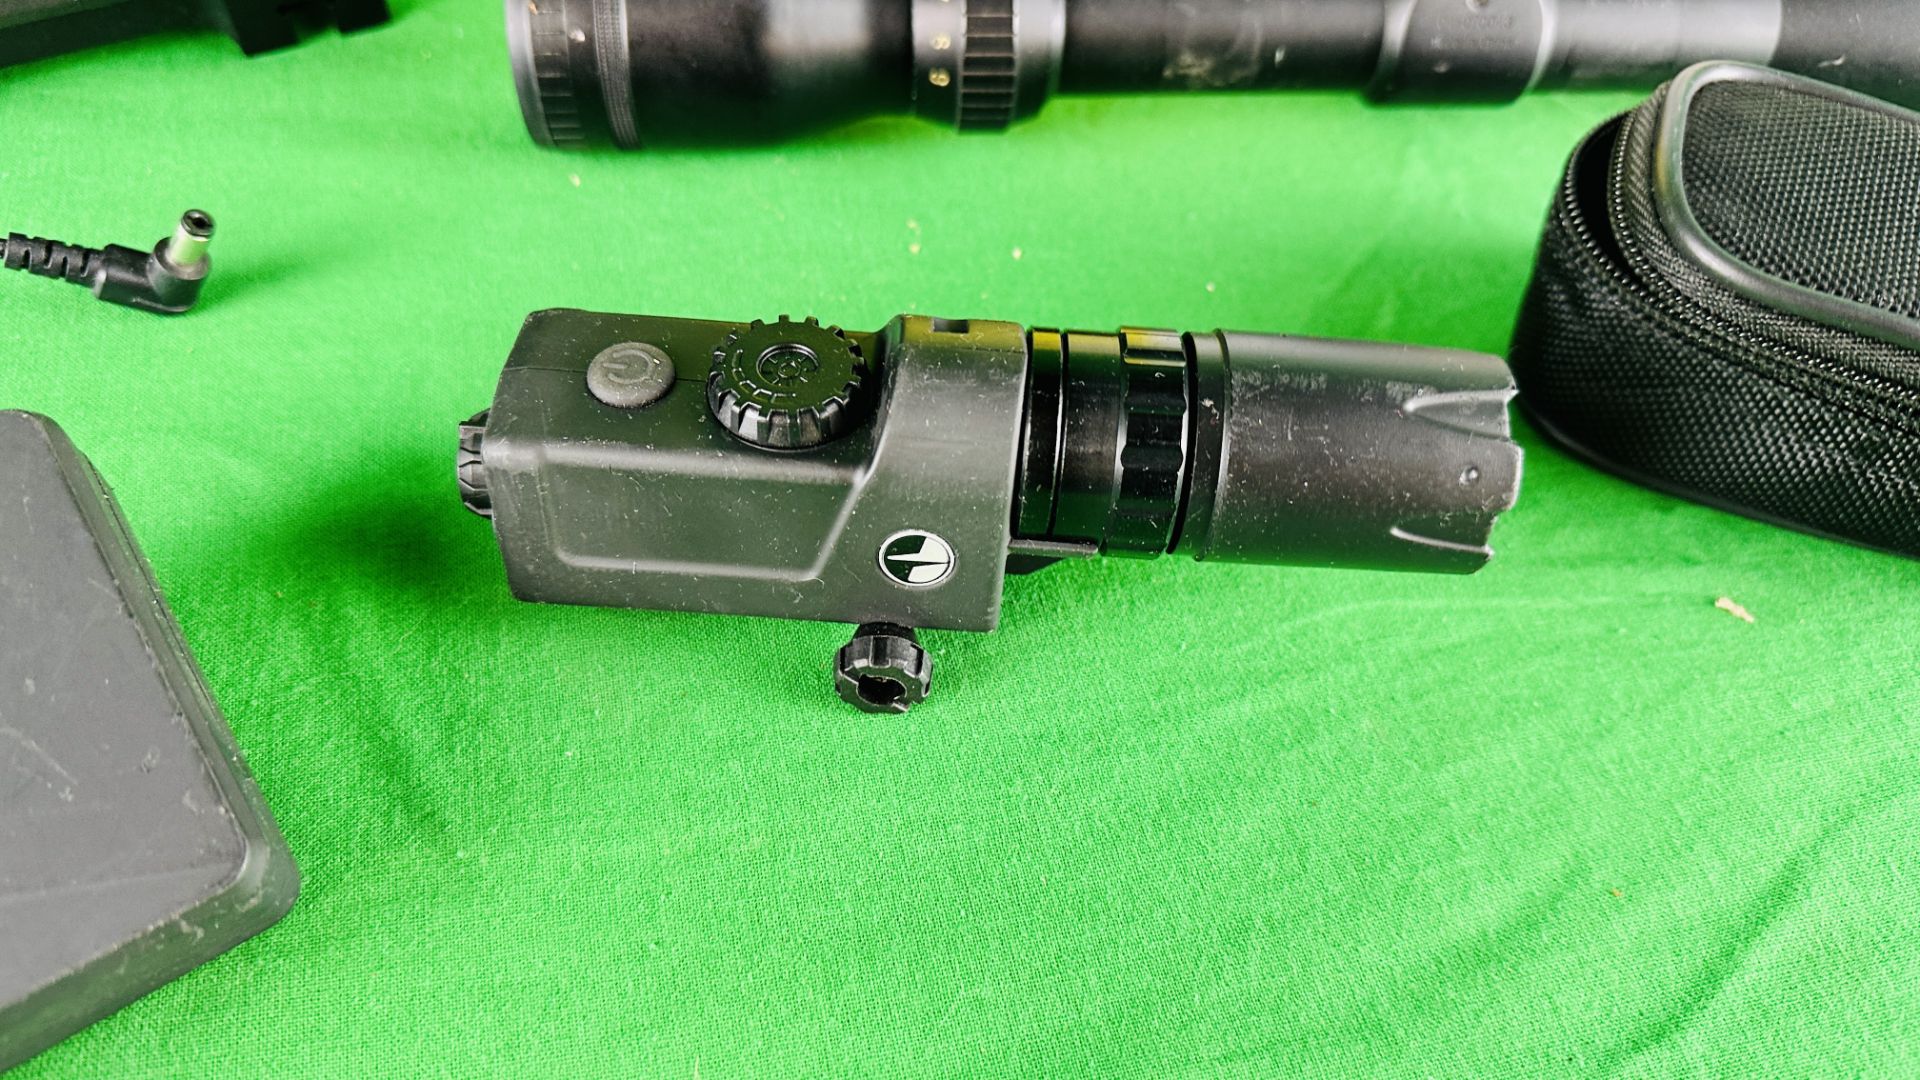 PULSAR DIGISIGHT RIFLE SCOPE, N550, BATTERY, CHARGER, PULSAR IR FLASHLIGHT L-808 - UNTESTED, - Image 6 of 10